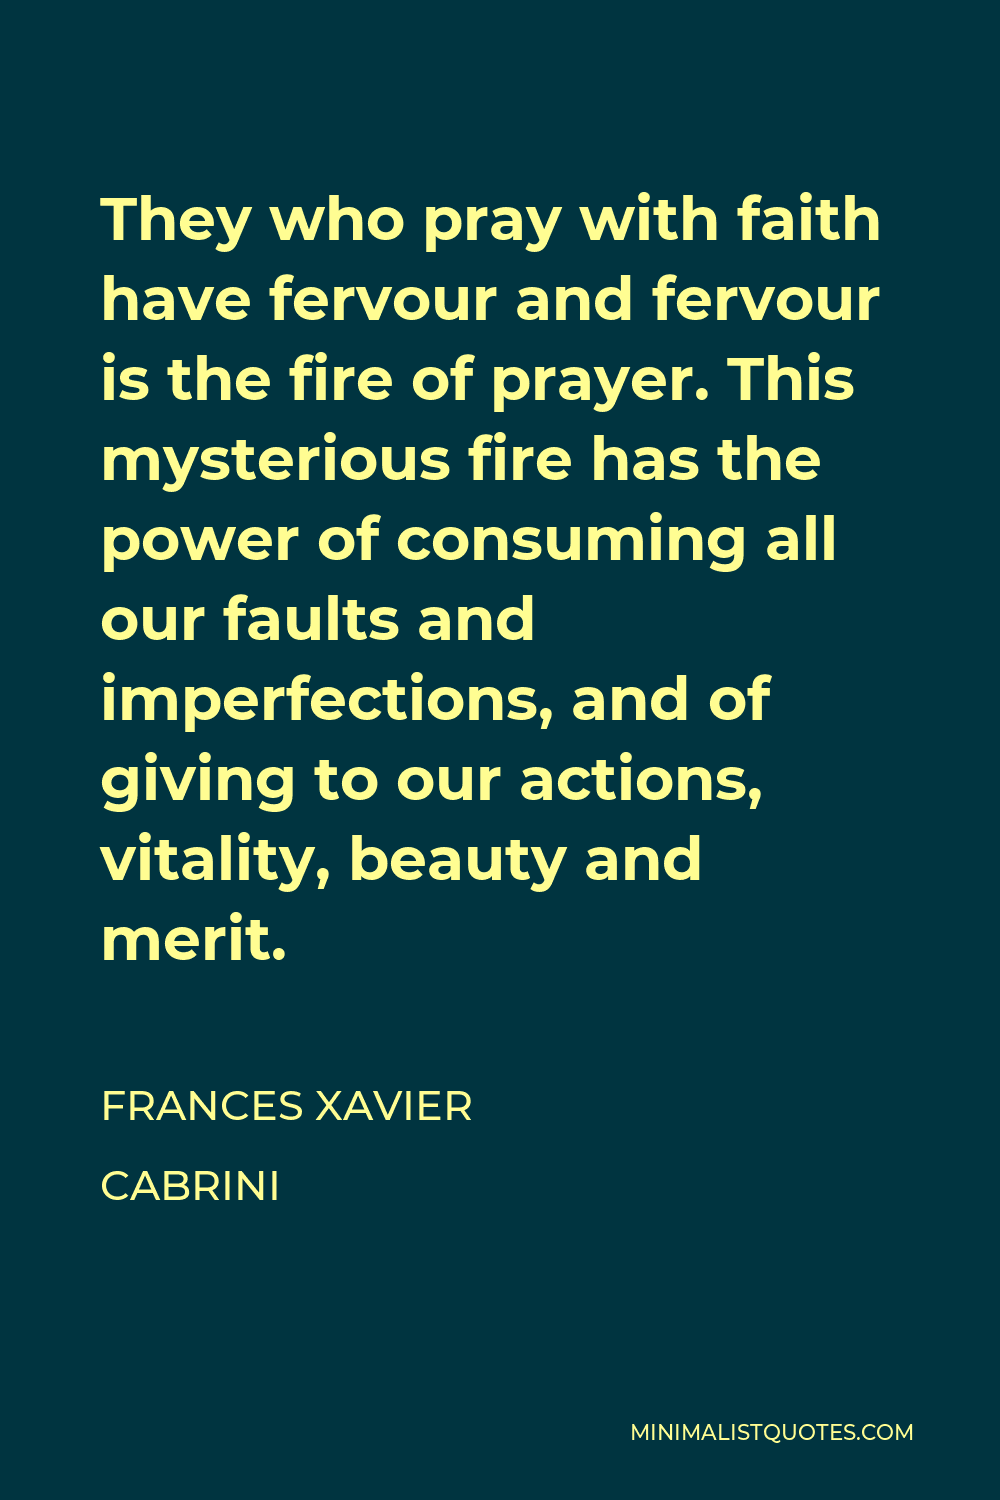 Frances Xavier Cabrini Quote - They who pray with faith have fervour and fervour is the fire of prayer. This mysterious fire has the power of consuming all our faults and imperfections, and of giving to our actions, vitality, beauty and merit.